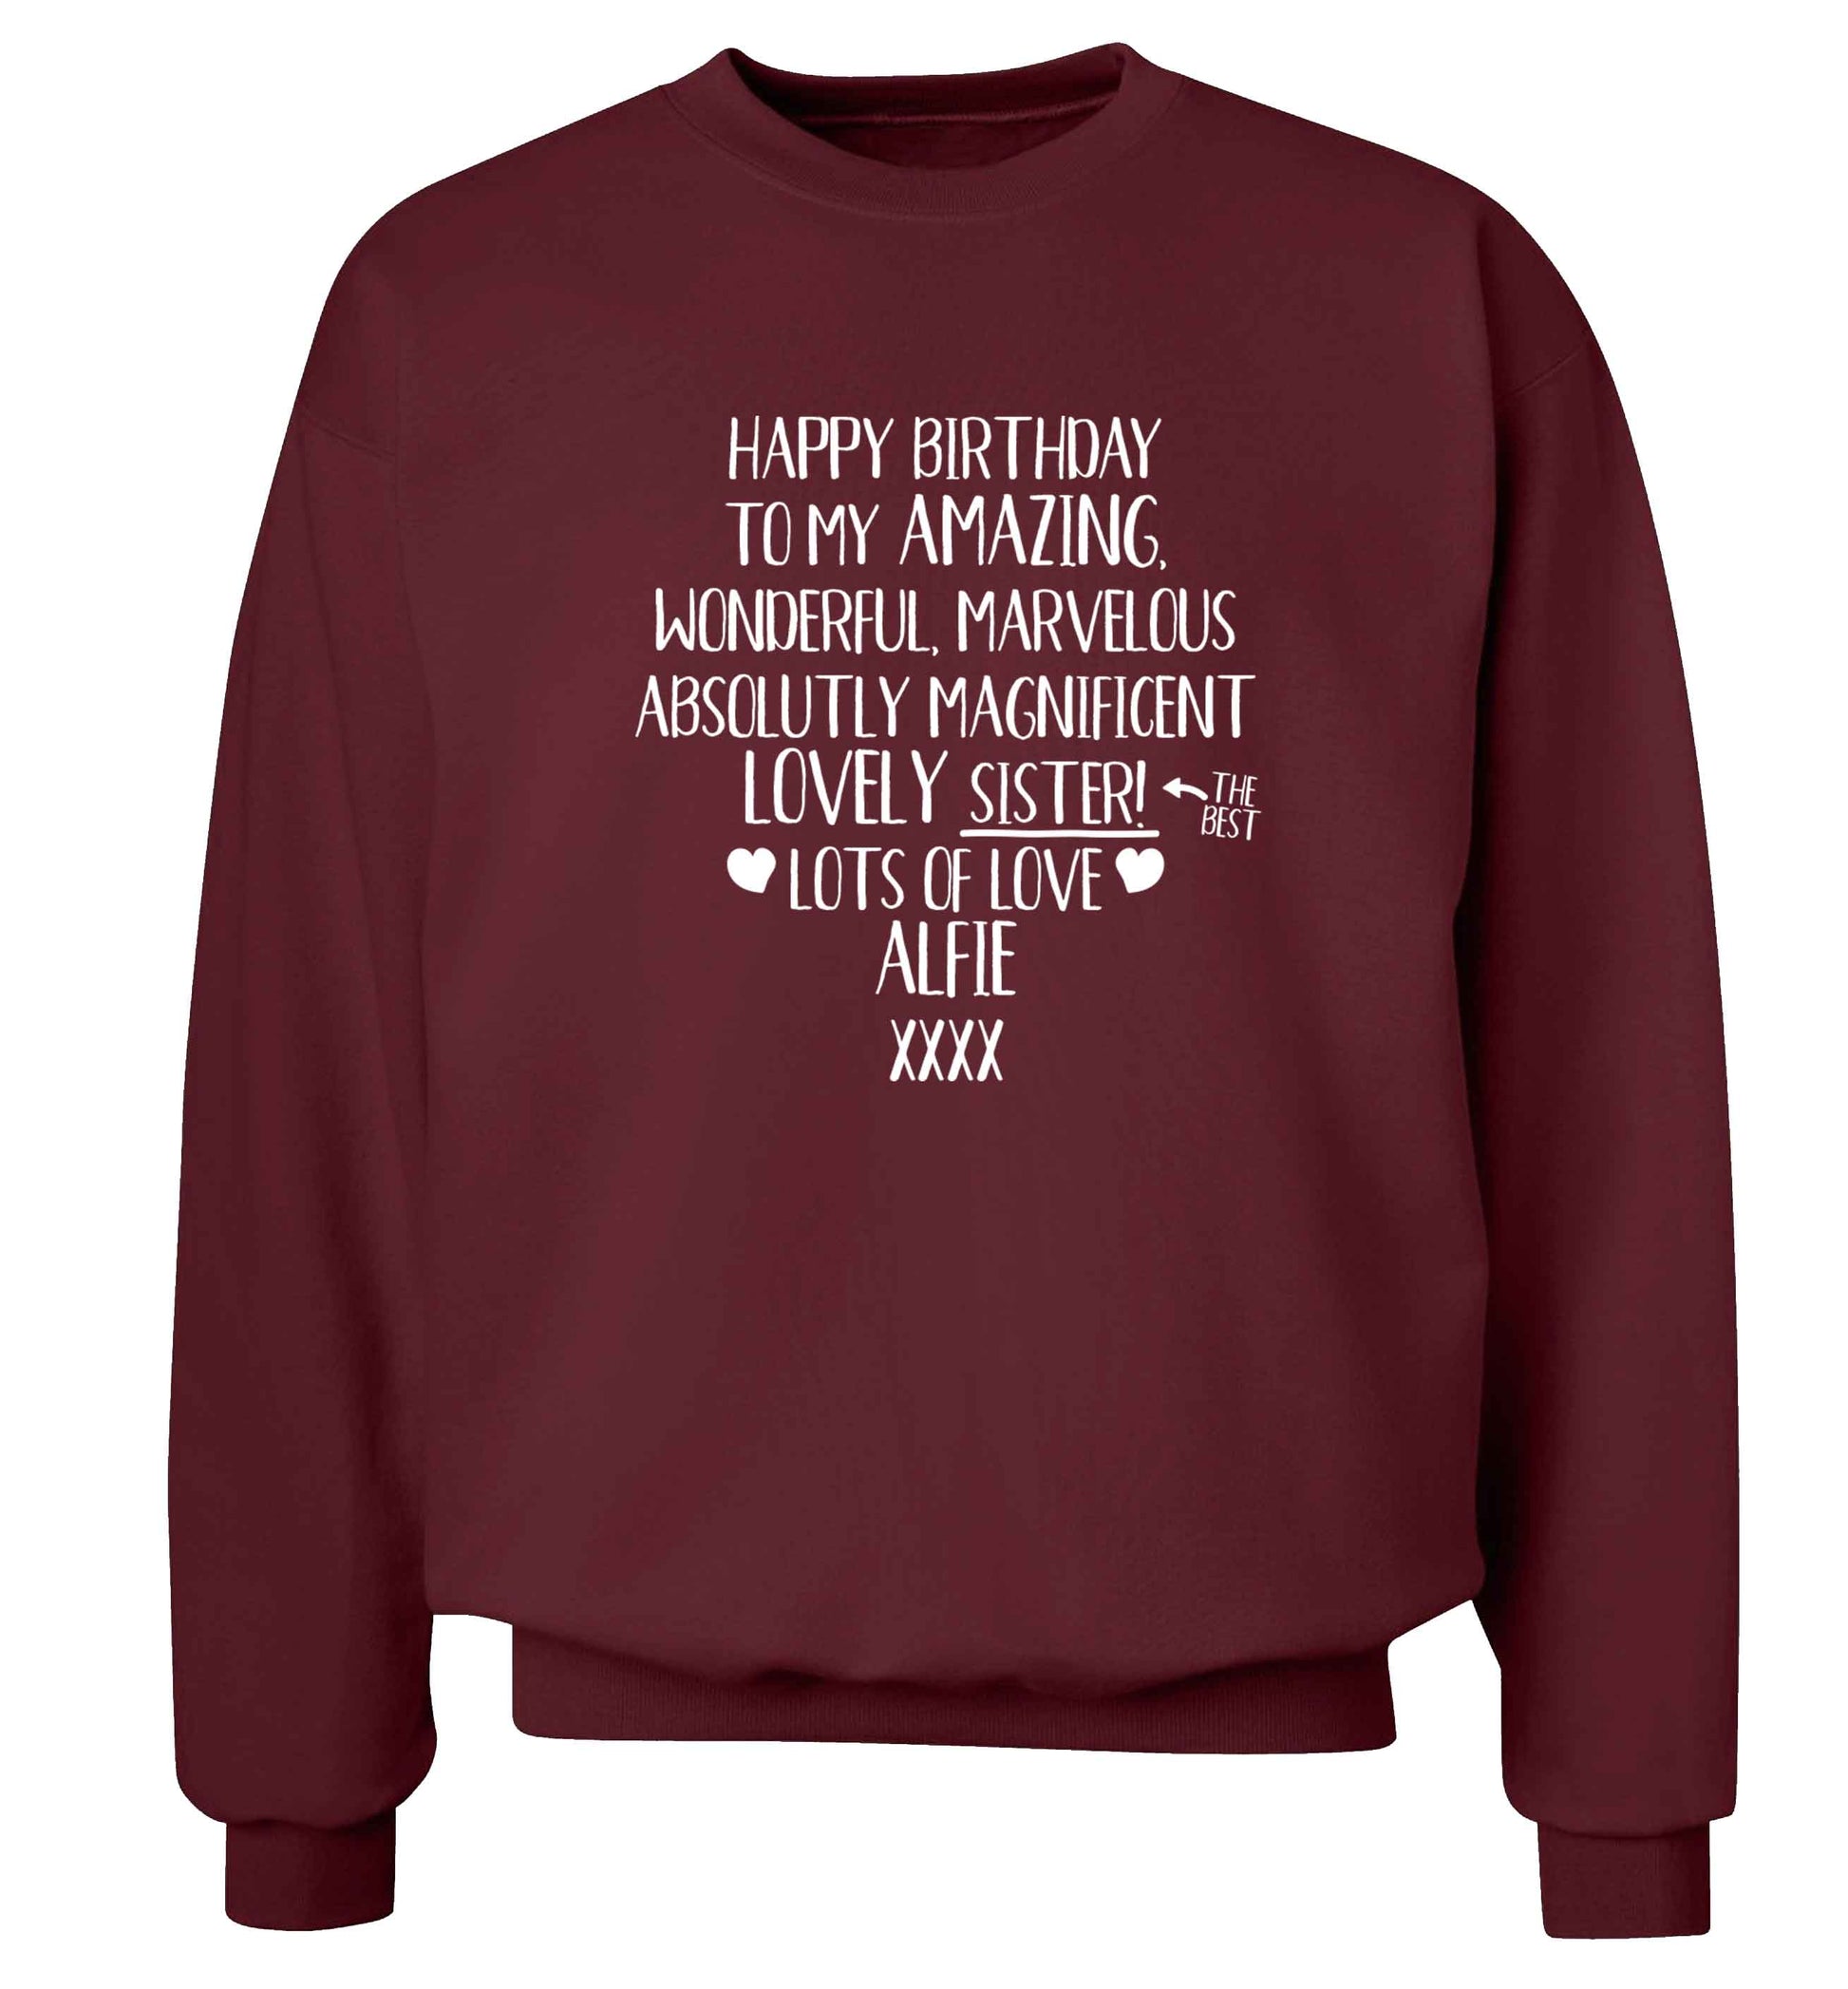 Personalised happy birthday to my amazing, wonderful, lovely sister Adult's unisex maroon Sweater 2XL